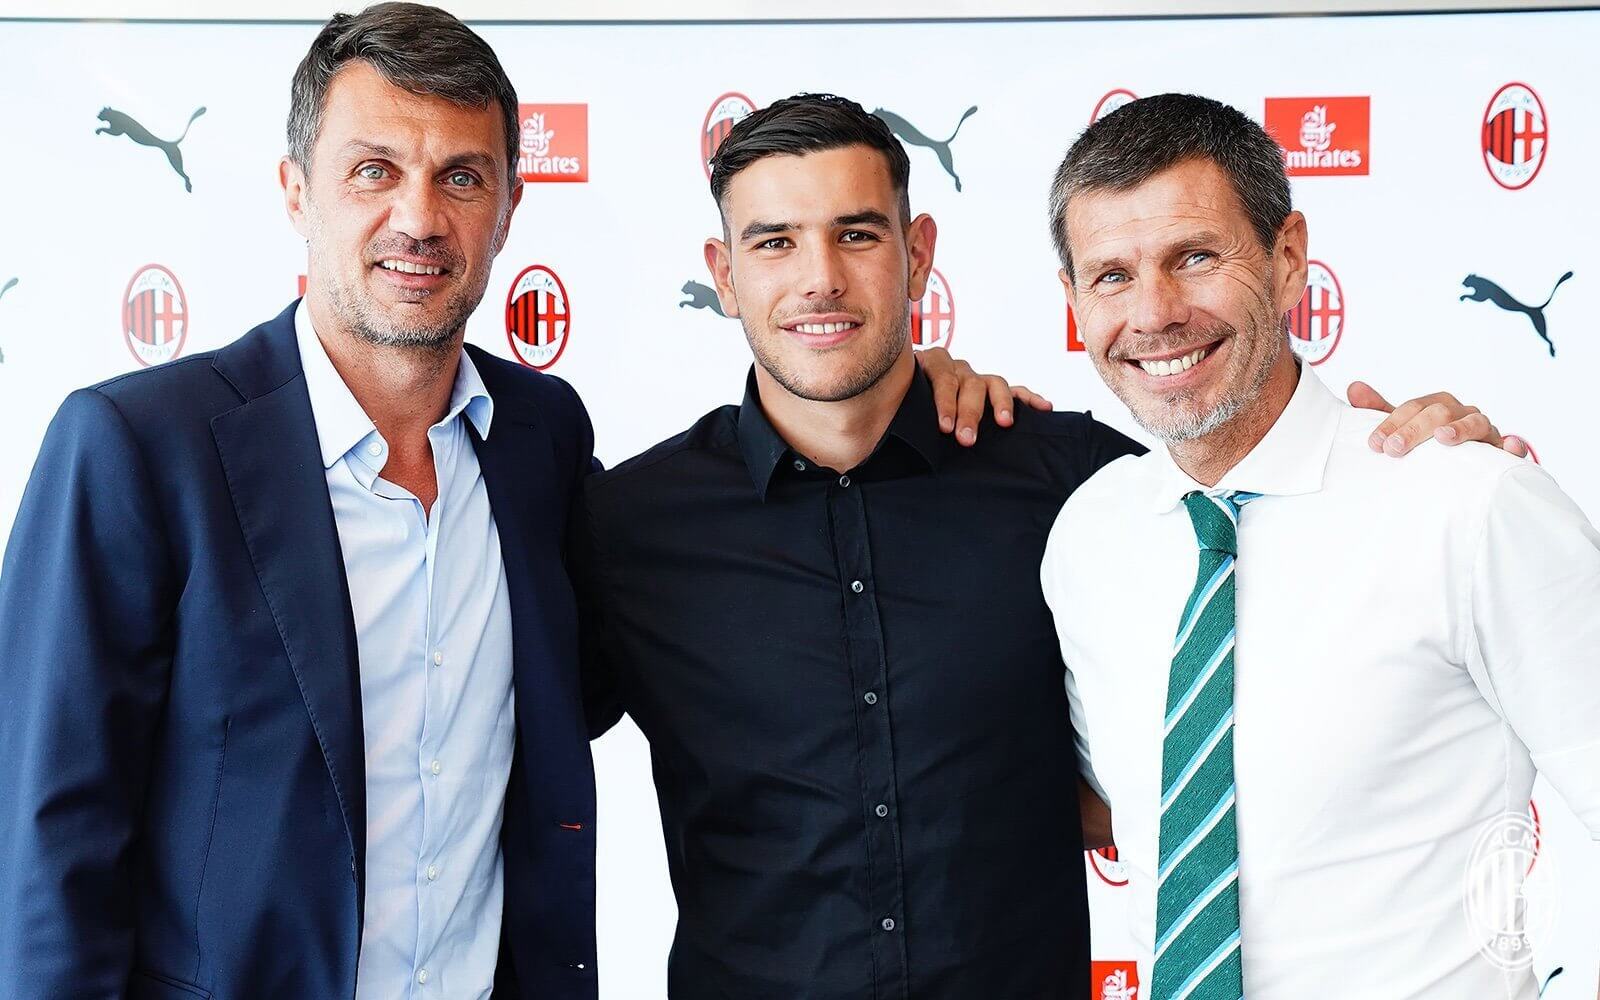 Maldini met with Theo Hernandez to extend his AC Milan stay